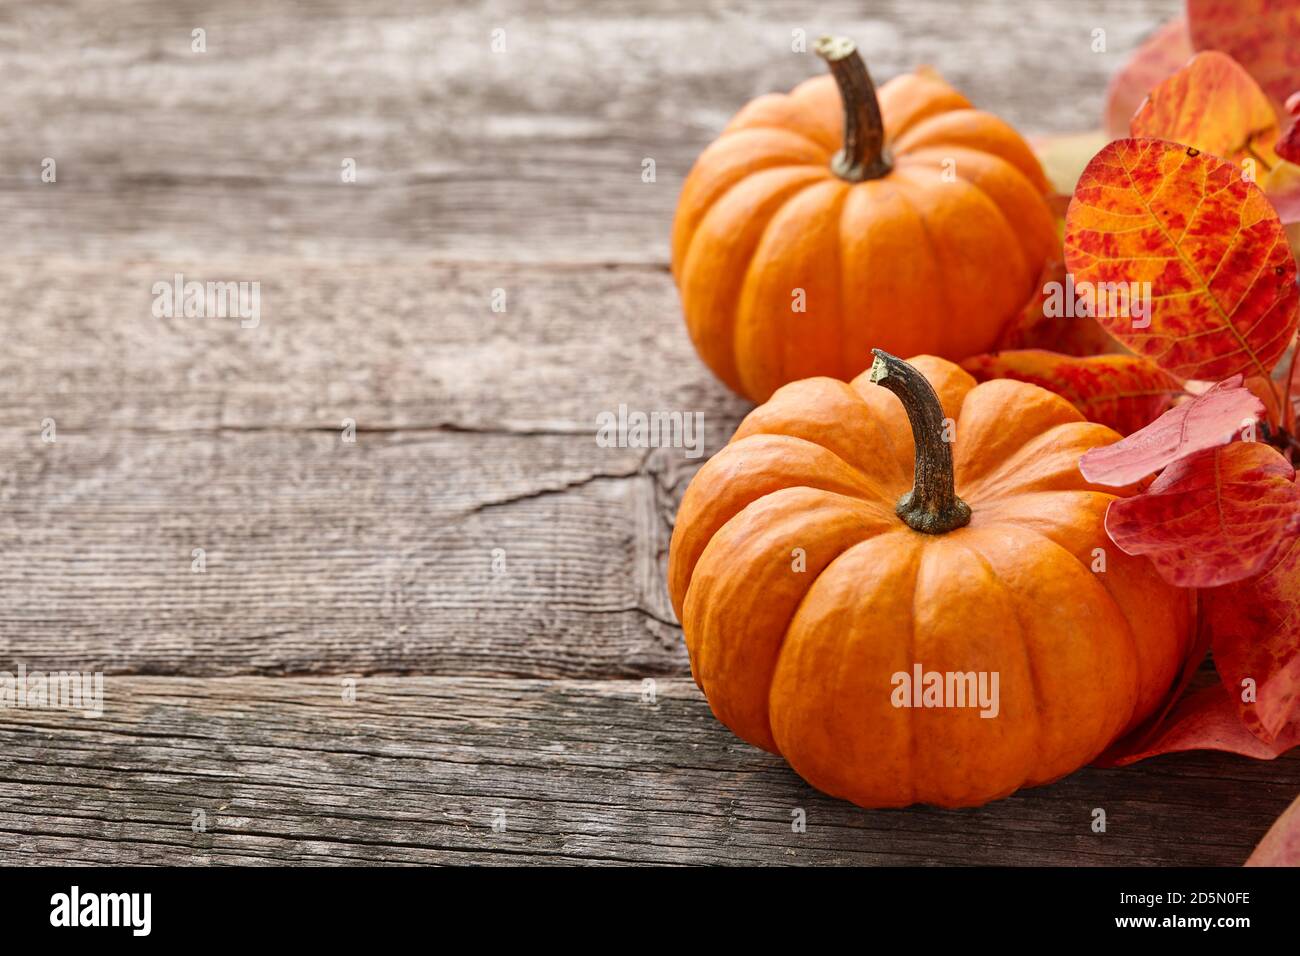 Beautiful mini pumpkin and autumn leaves on wooden planks background, copy space Stock Photo